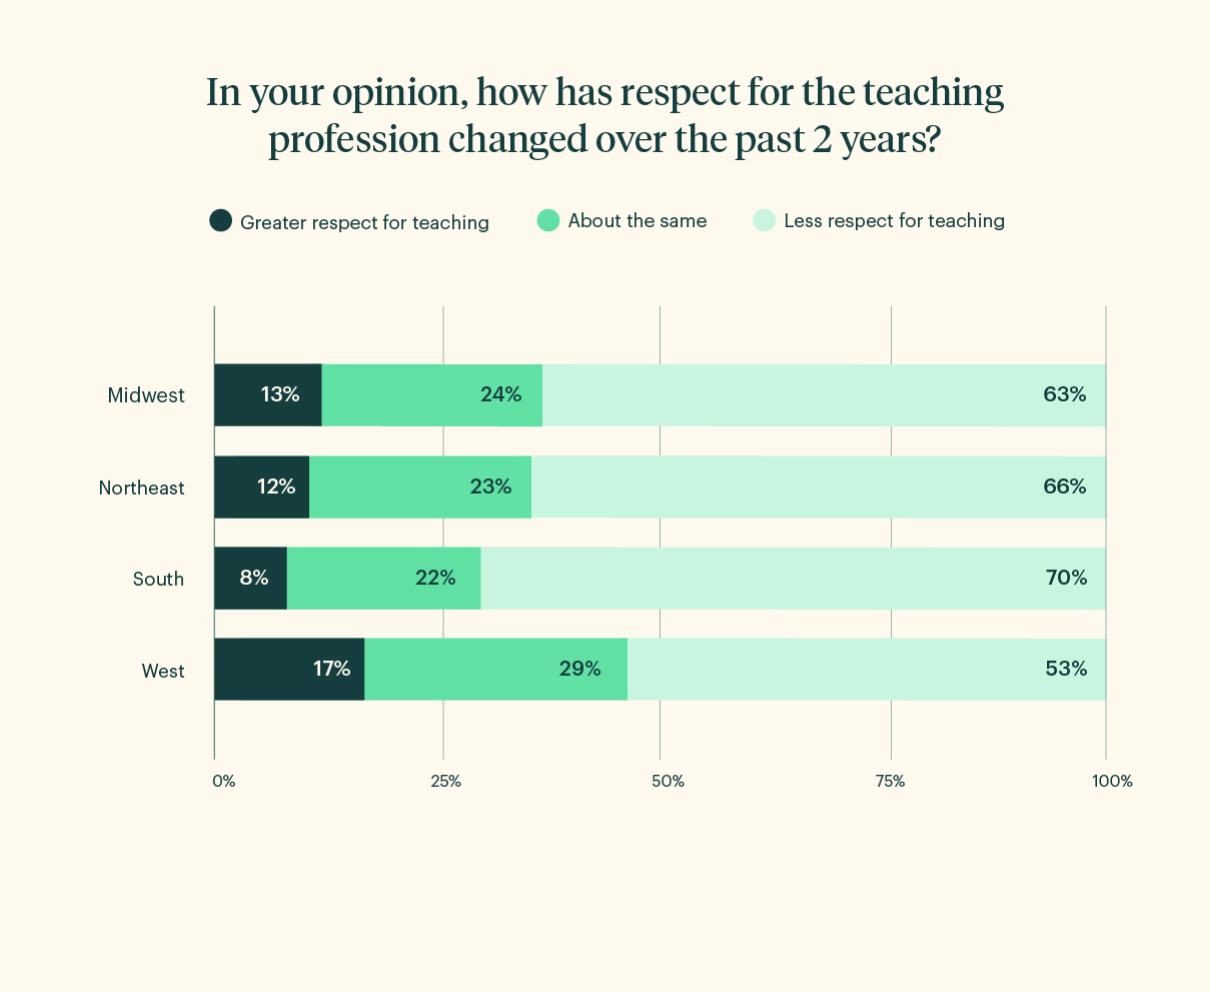 Graph 5: In your opinion, how has respect for the teaching profession changed over the past 2 years?